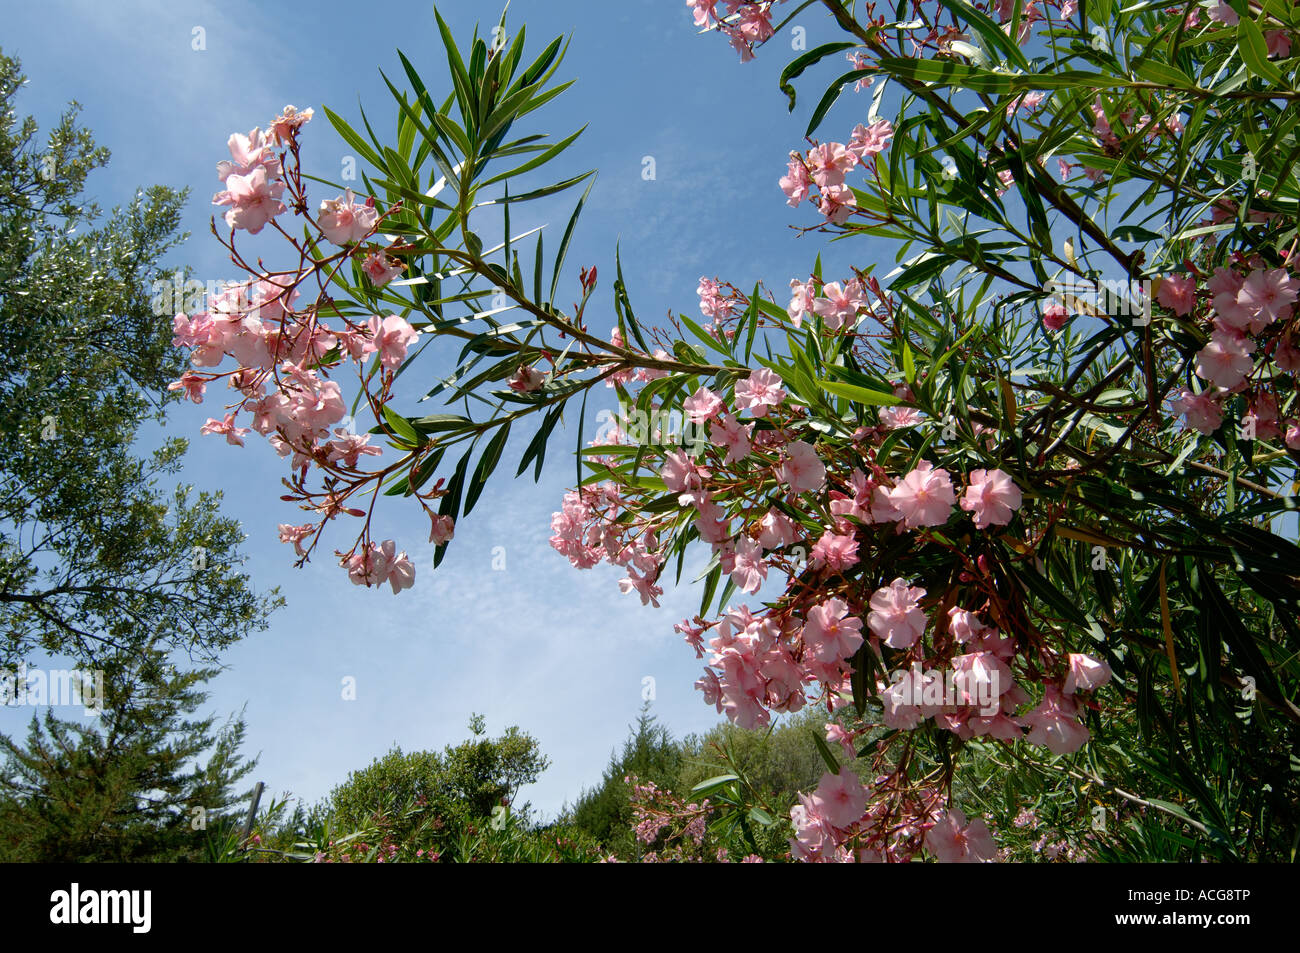 Pink double flowers of an oleander Nerium oleander in a Corsican garden Stock Photo